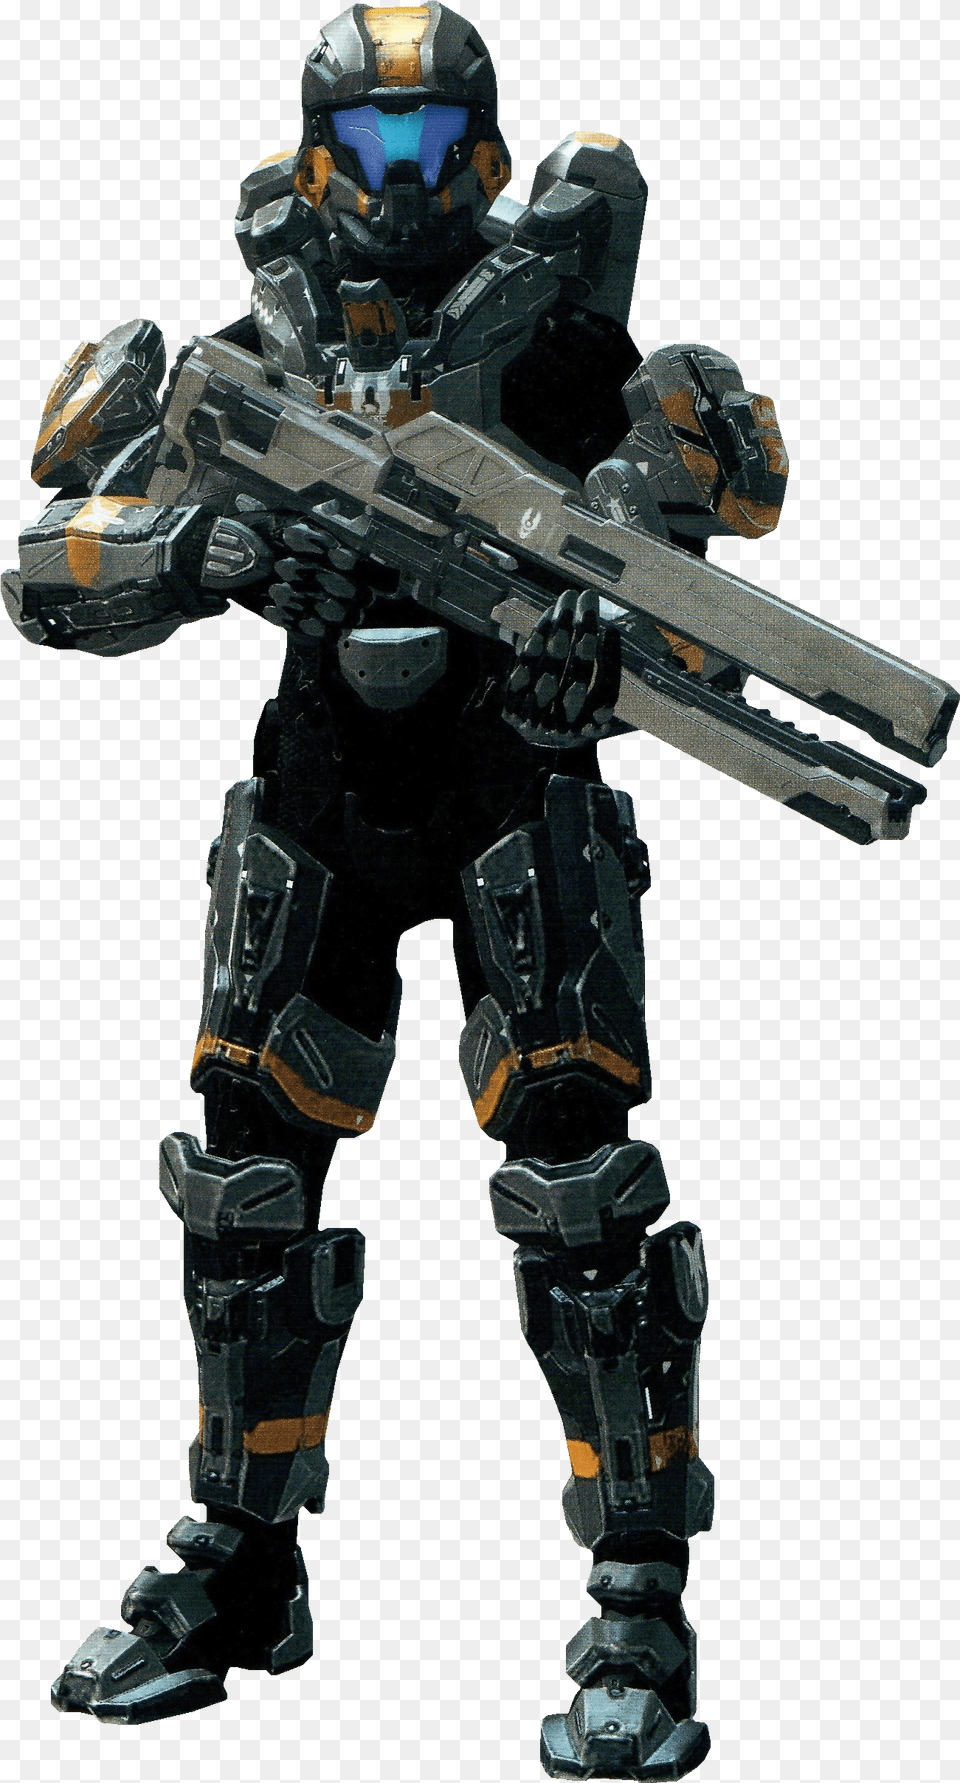 Halo 4 Campaign Spartan, Toy, Gun, Weapon, Helmet Free Png Download